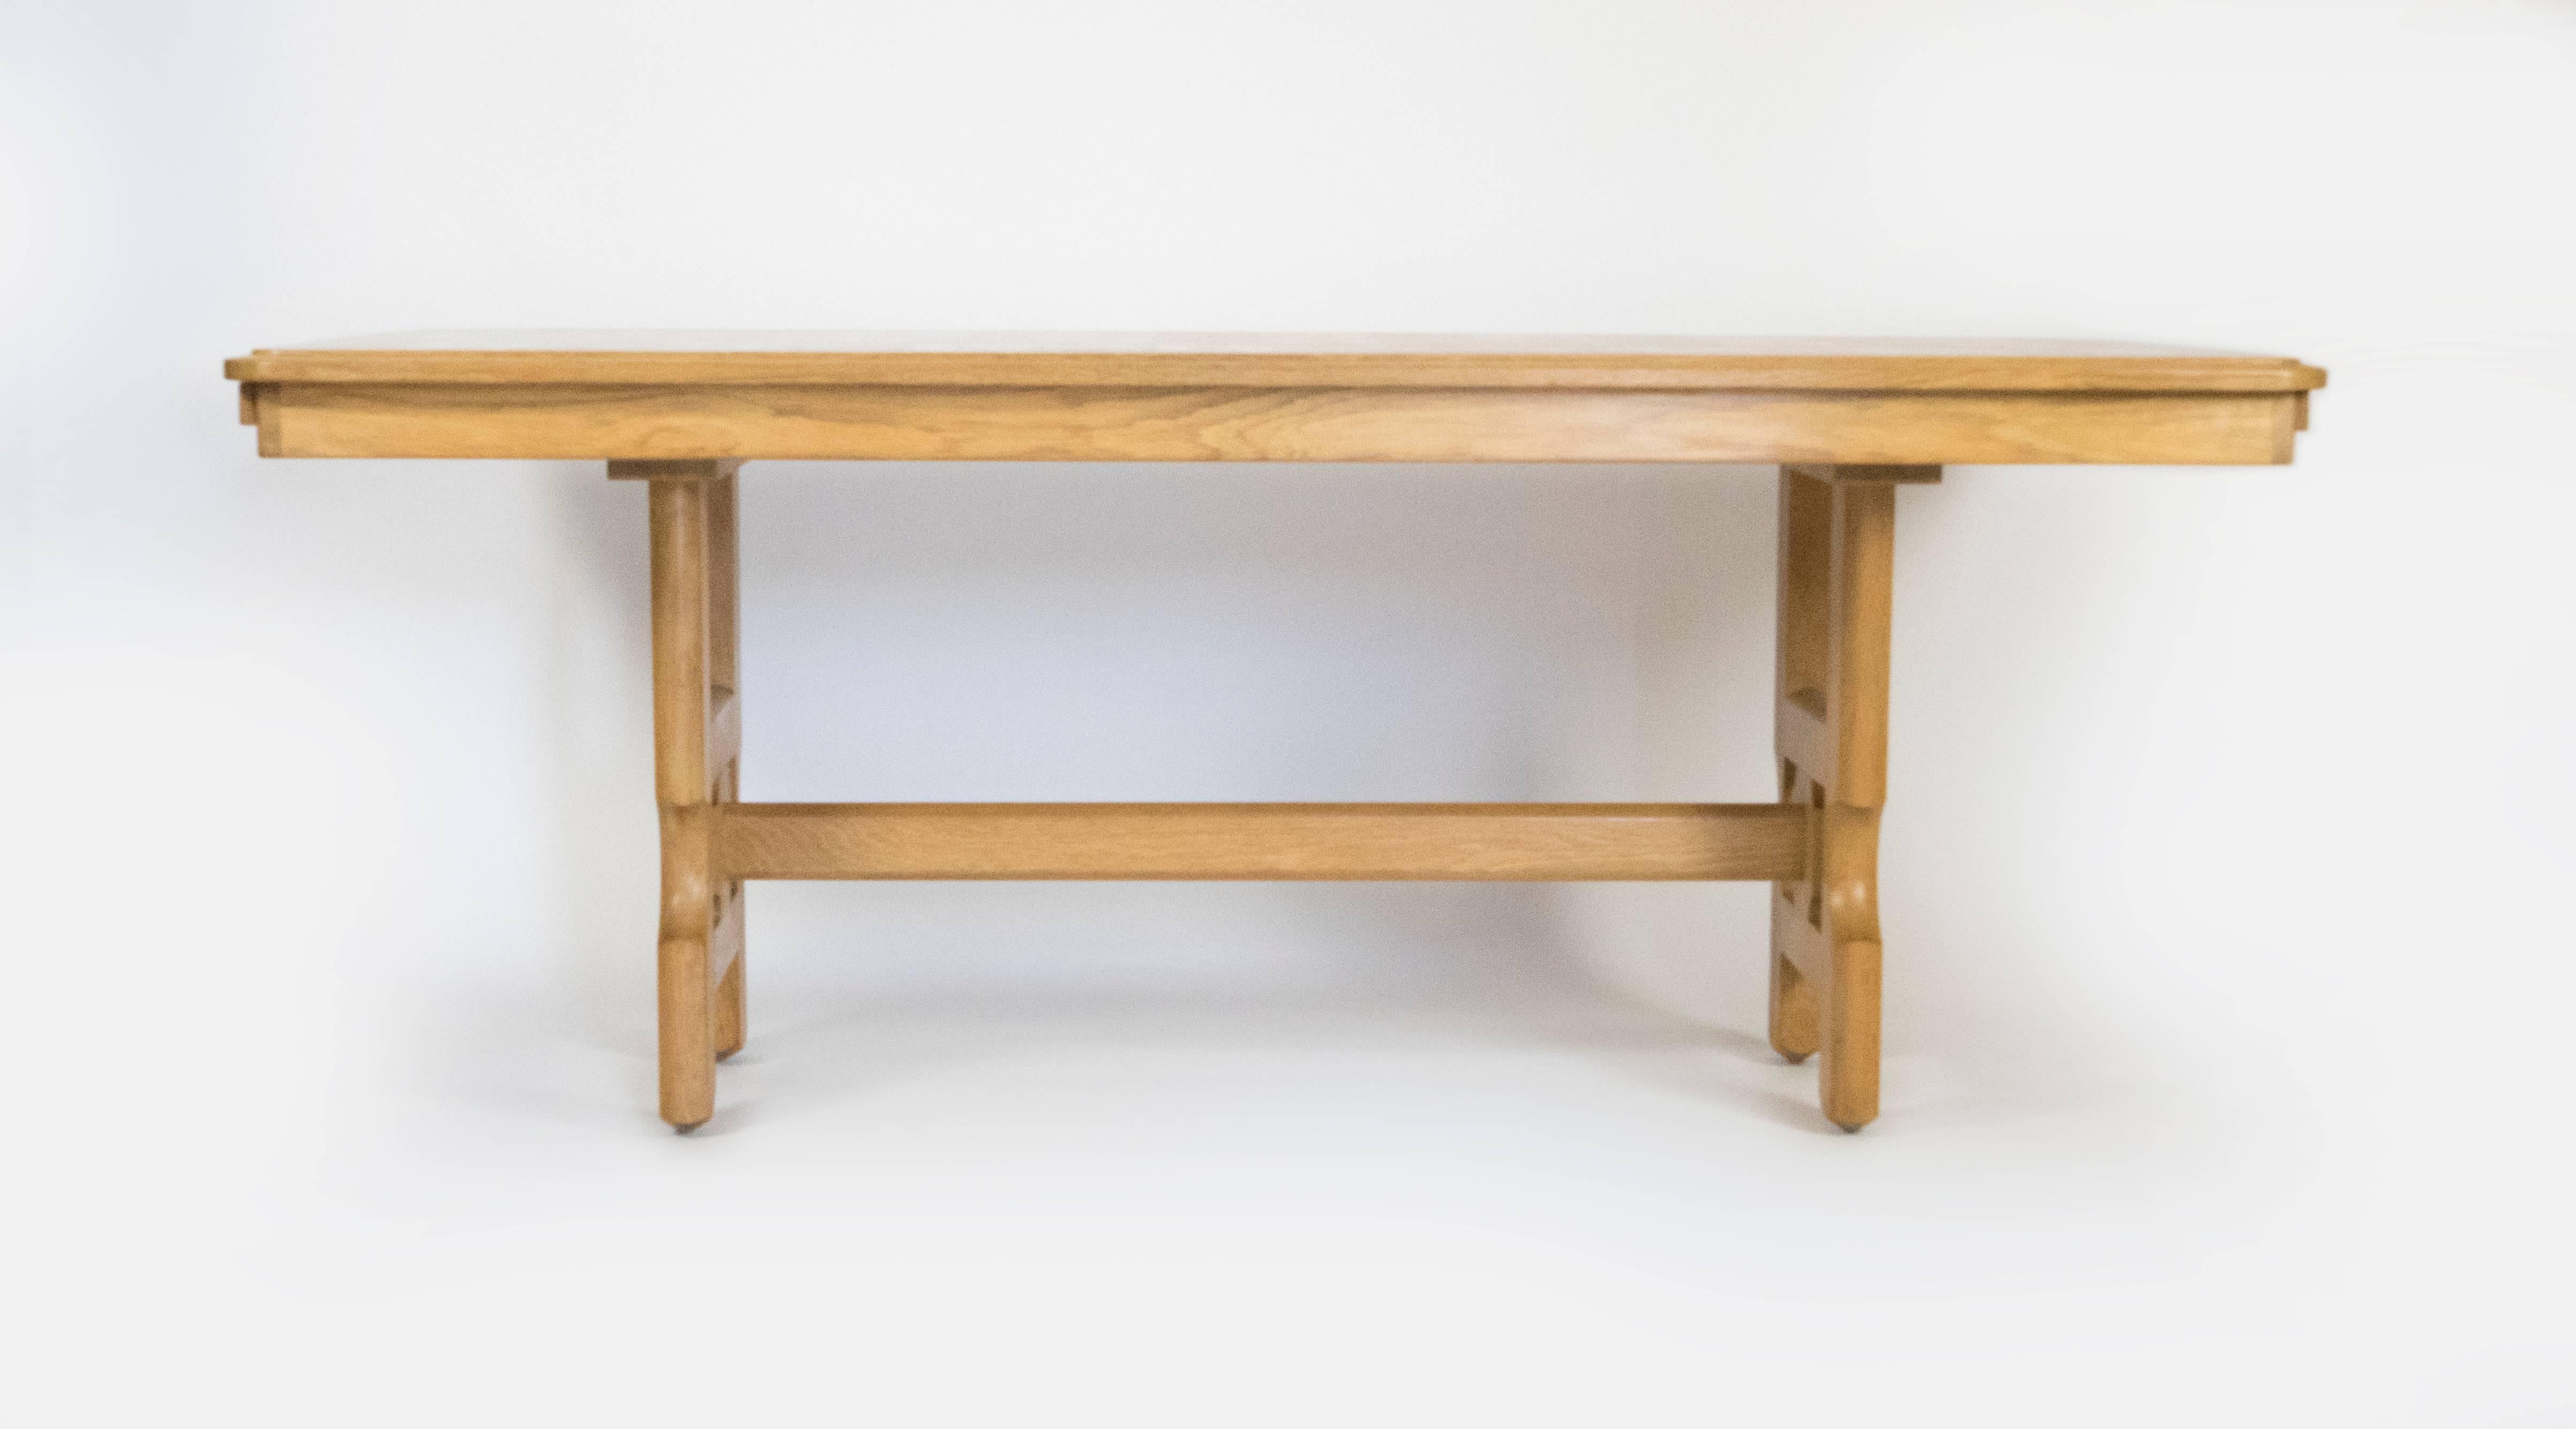 This beautiful table designed by Guillerme et Chambon for Votre Maison is in great condition. Crafted from solid oak, the carved legs encase a carved medallion. The table has two finished leaves with the same design as the top which adds an